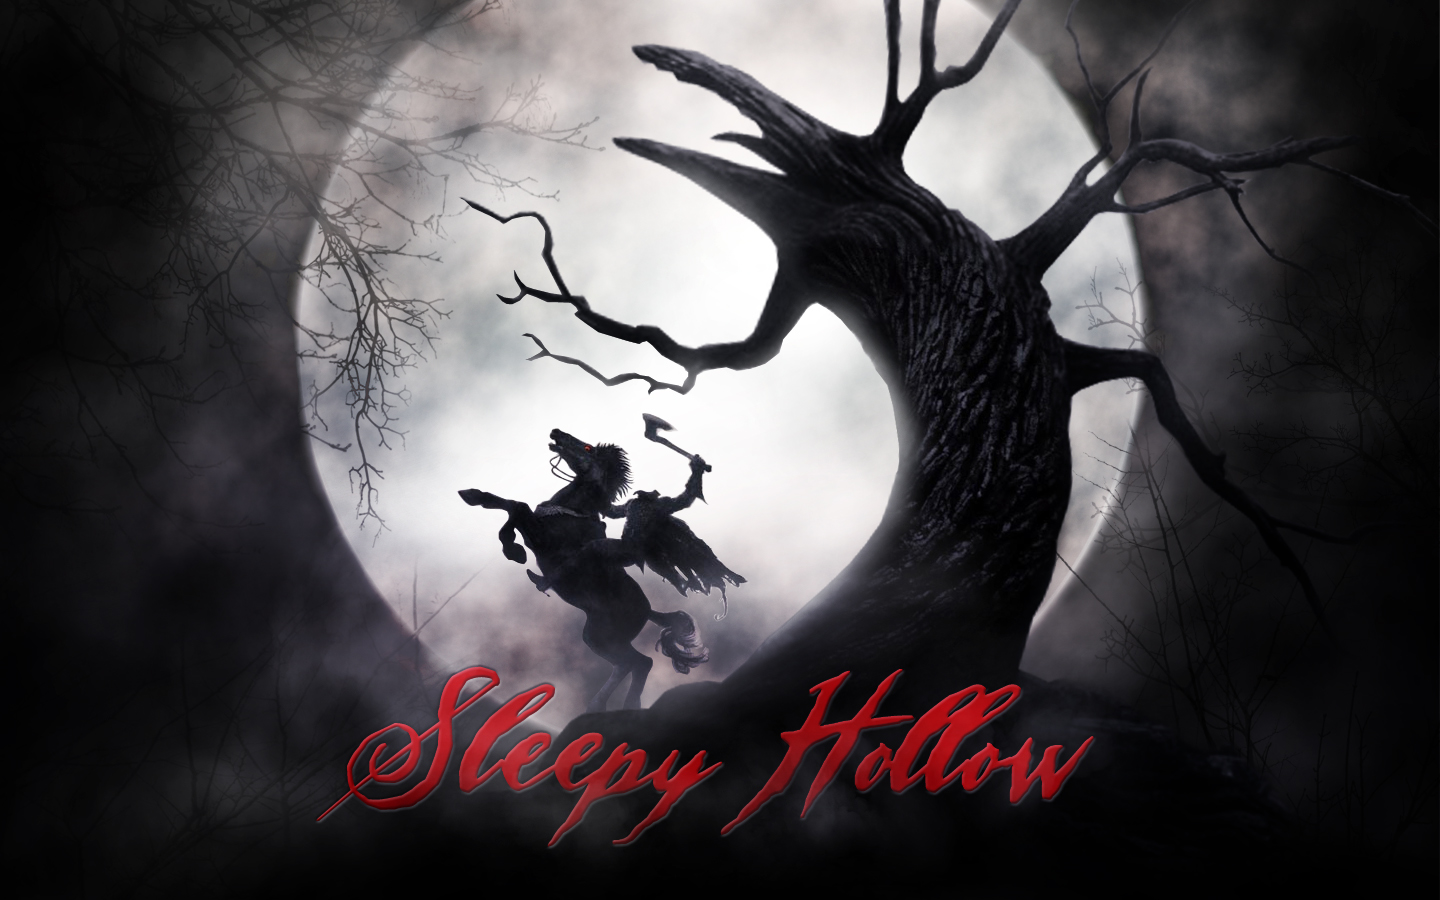 Sleepy Hollow Backgrounds, Compatible - PC, Mobile, Gadgets| 1440x900 px